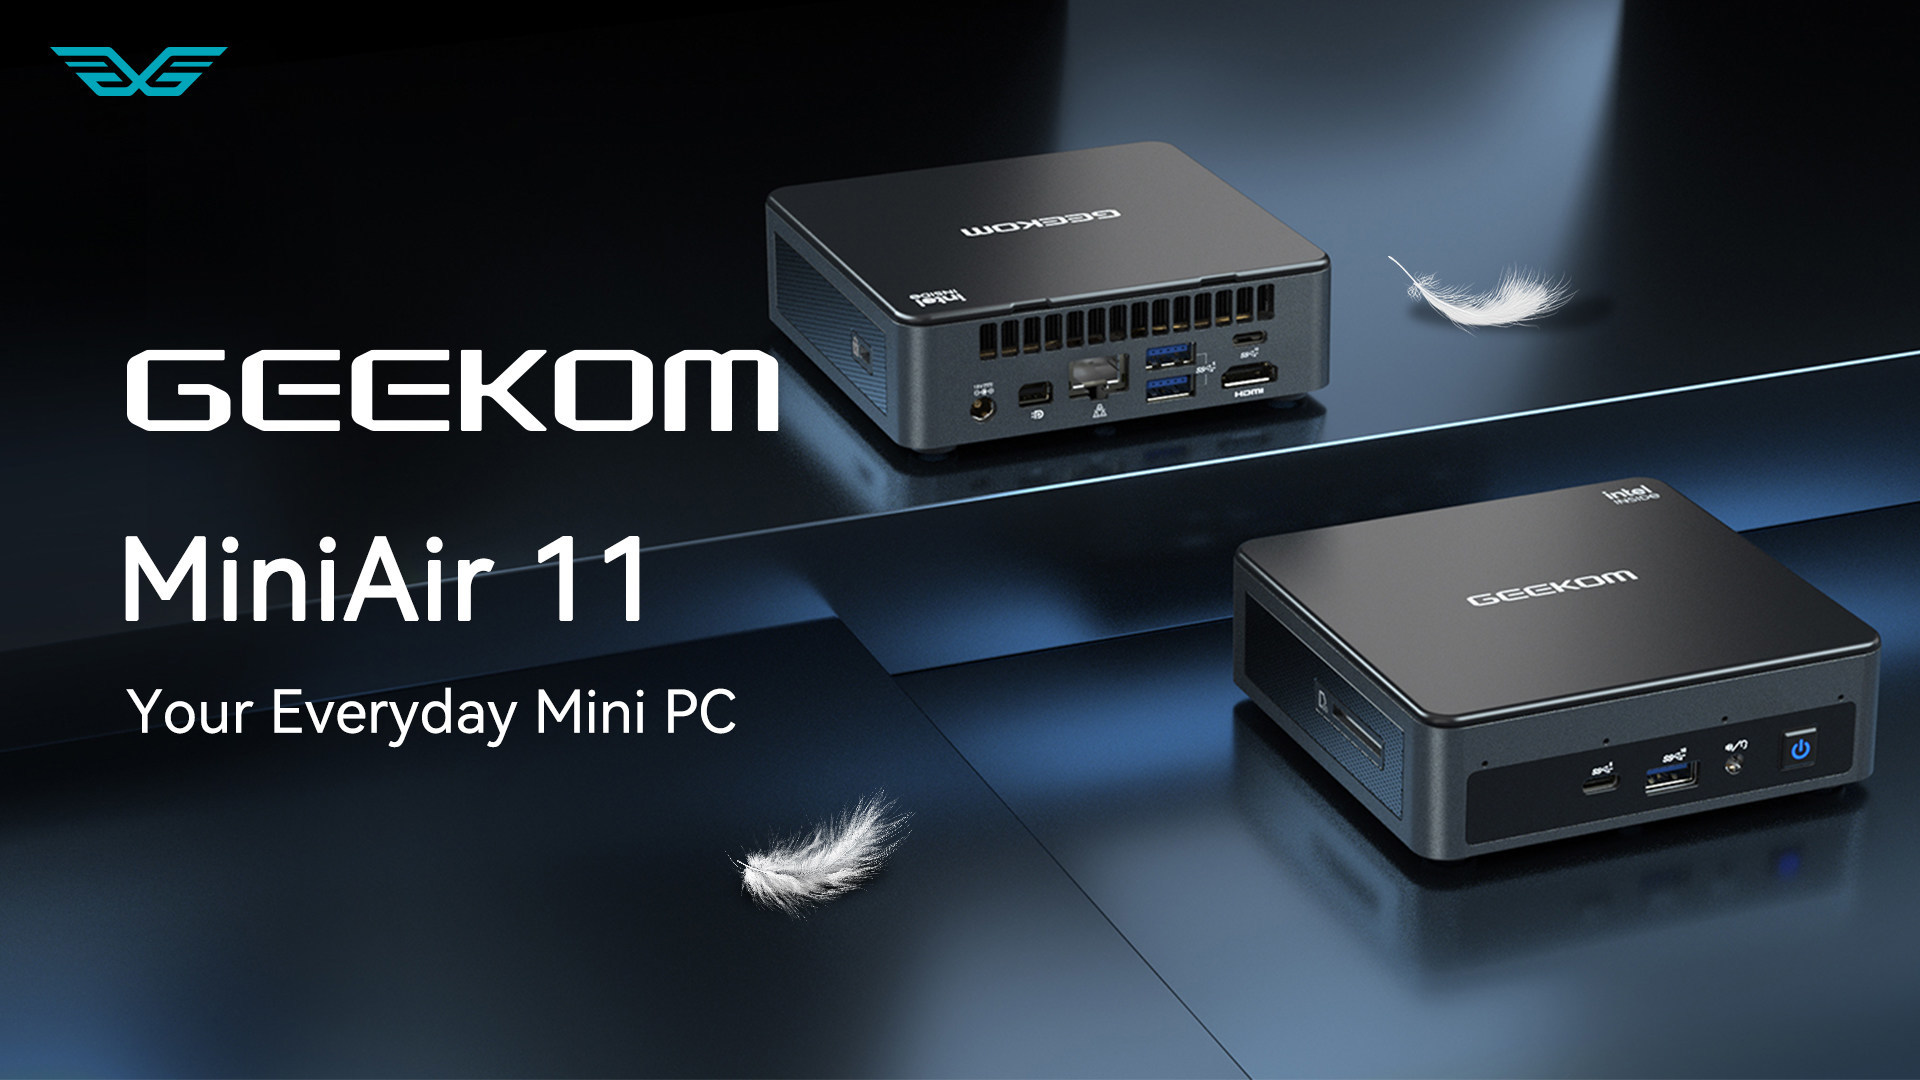 GEEKOM launches its latest MiniAir 11 PC with 11th-gen Celeron silicon Windows 11 Pro out of the box - NotebookCheck.net News